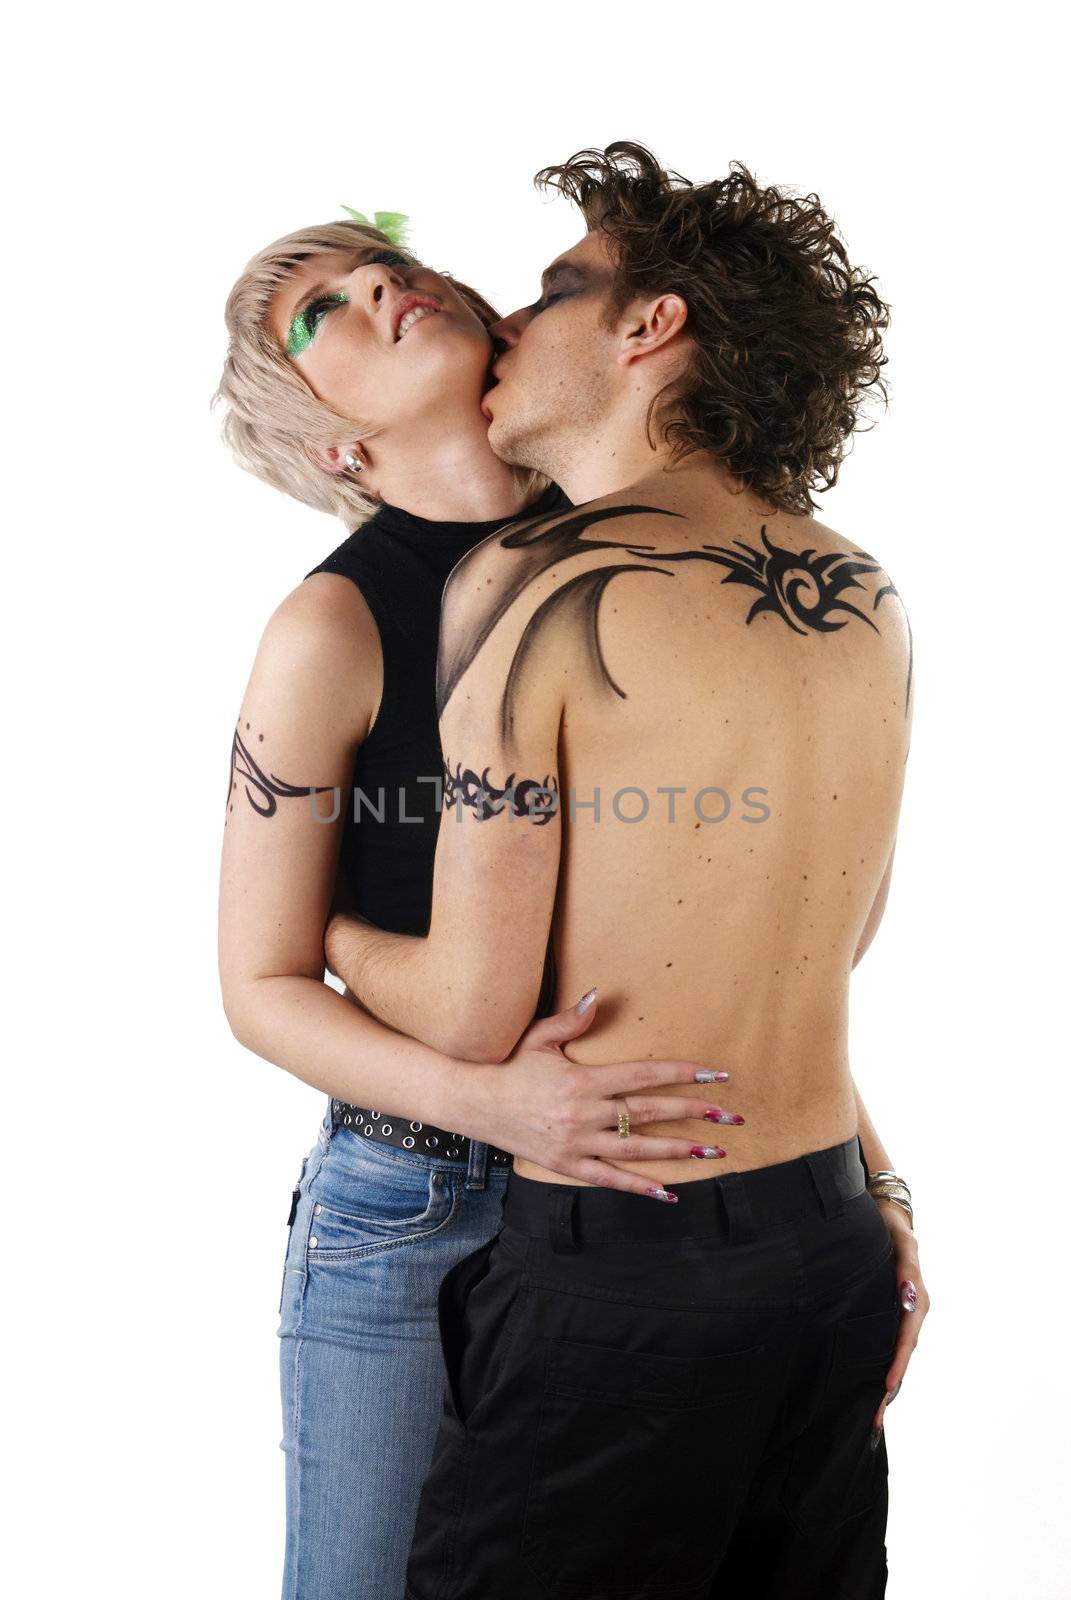 Tatto Couple by adamr